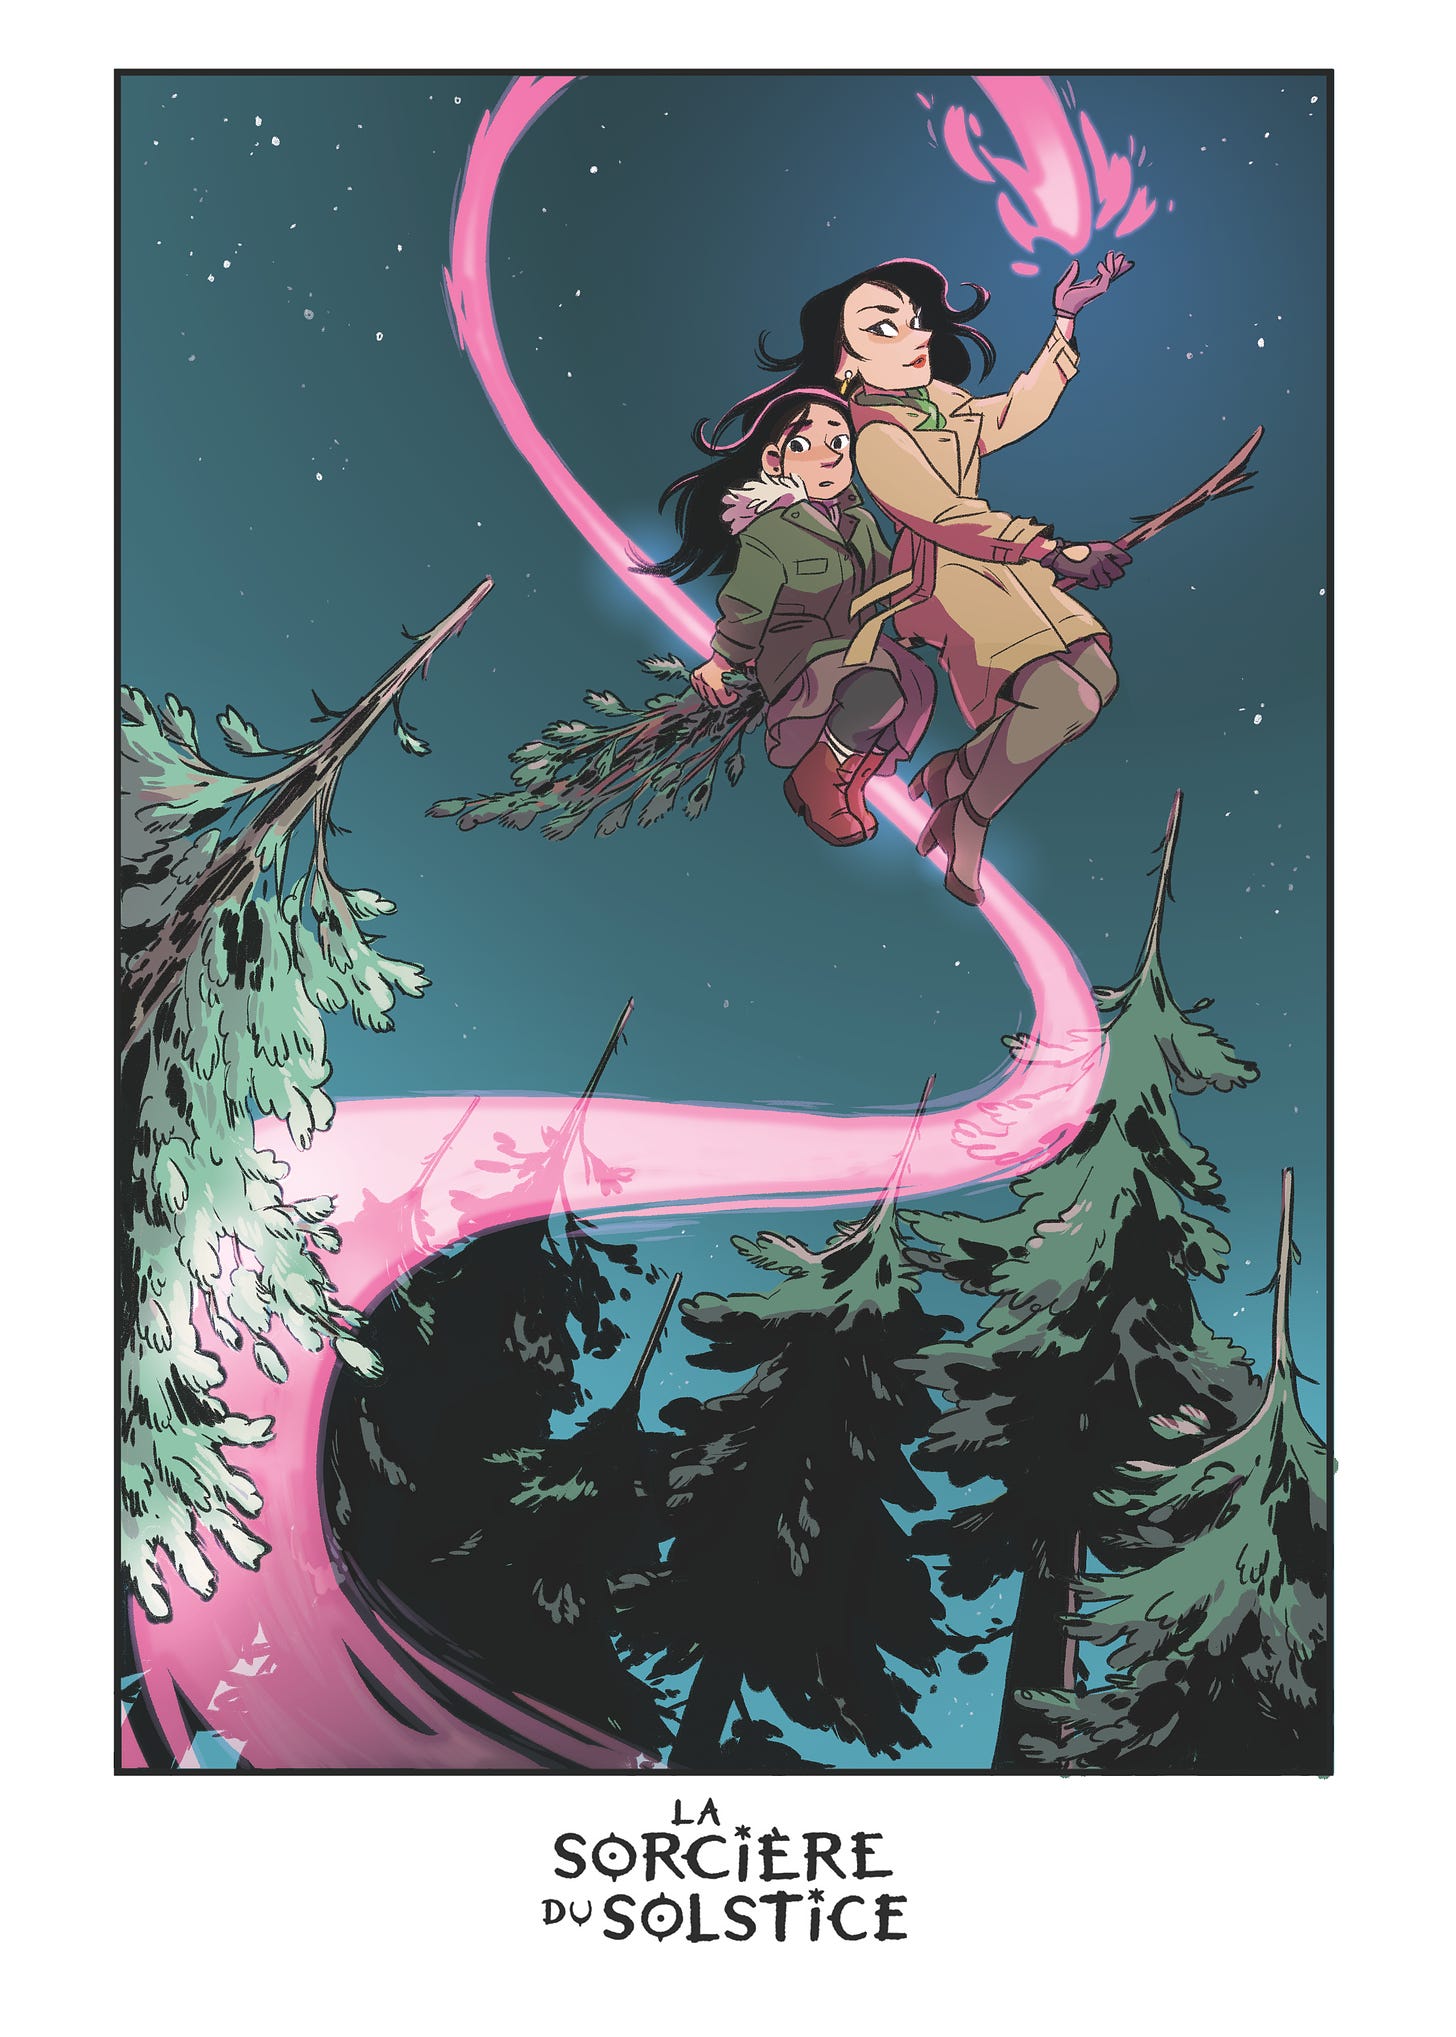 an illustration of Ariel, from the Midwinter Witch, being kidnapped on a broomstick by her aunt